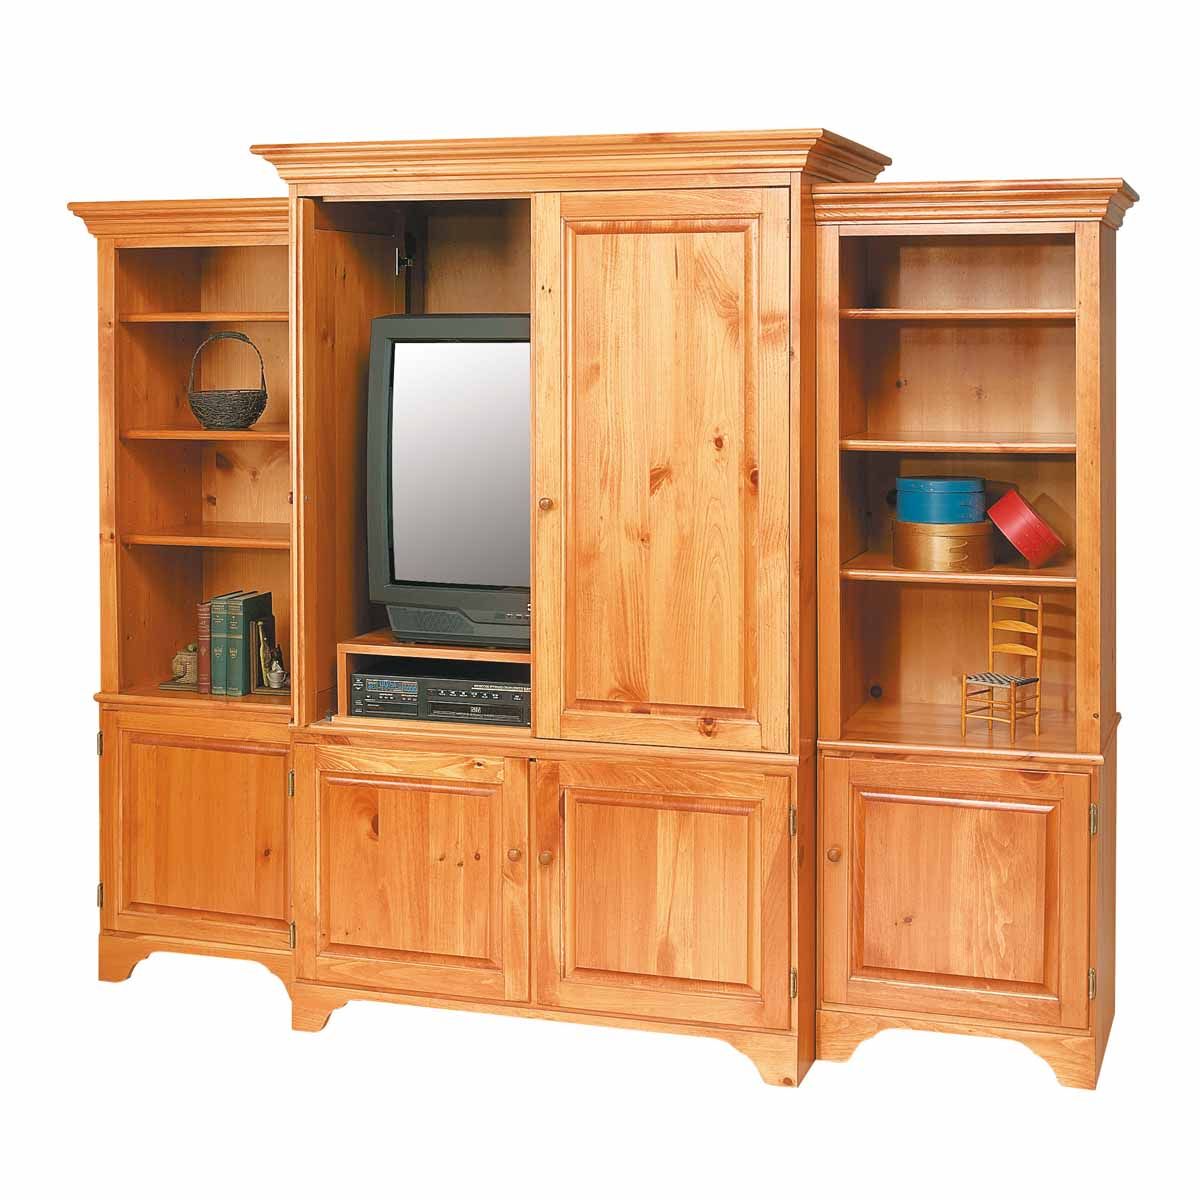 Pine Tv Stands Intended For Favorite Shaker Unfinished Pine Tv Stands Entertainment Center Solid Natural Pi (View 5 of 20)